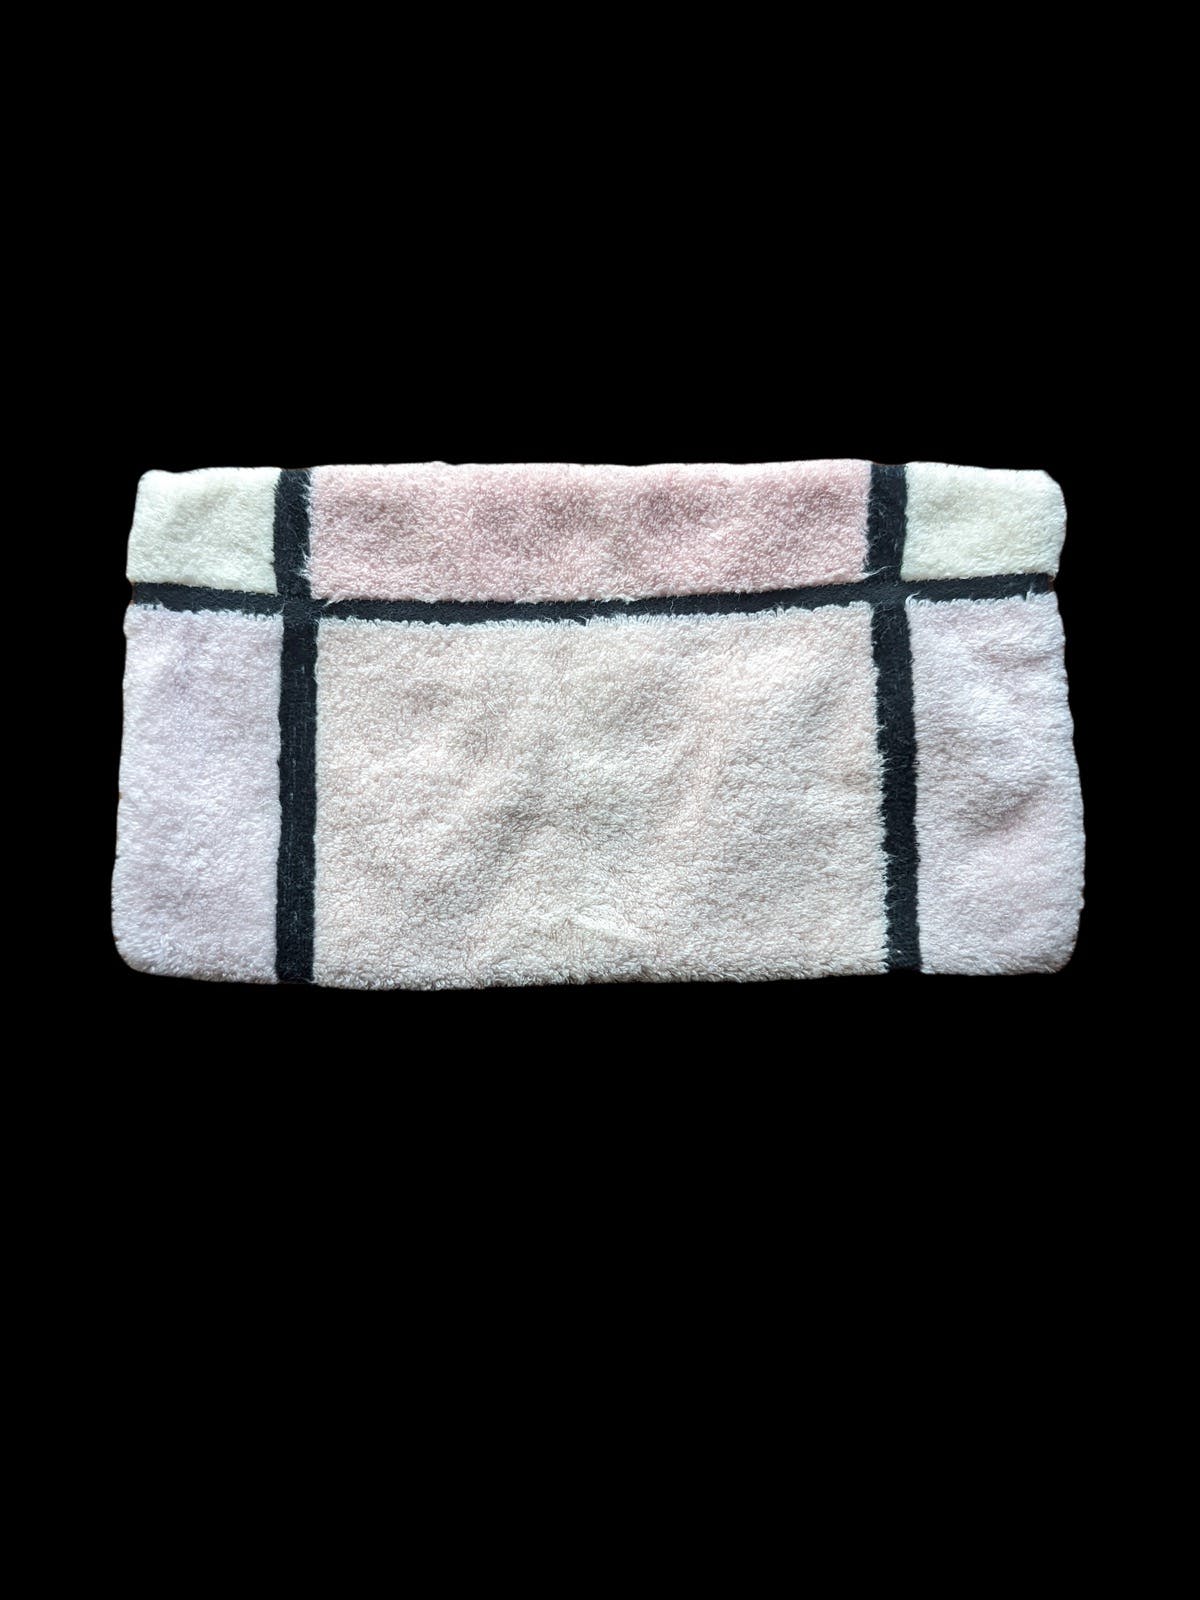 GIVENCHY PINKY TOWEL POUCH BAG - 4